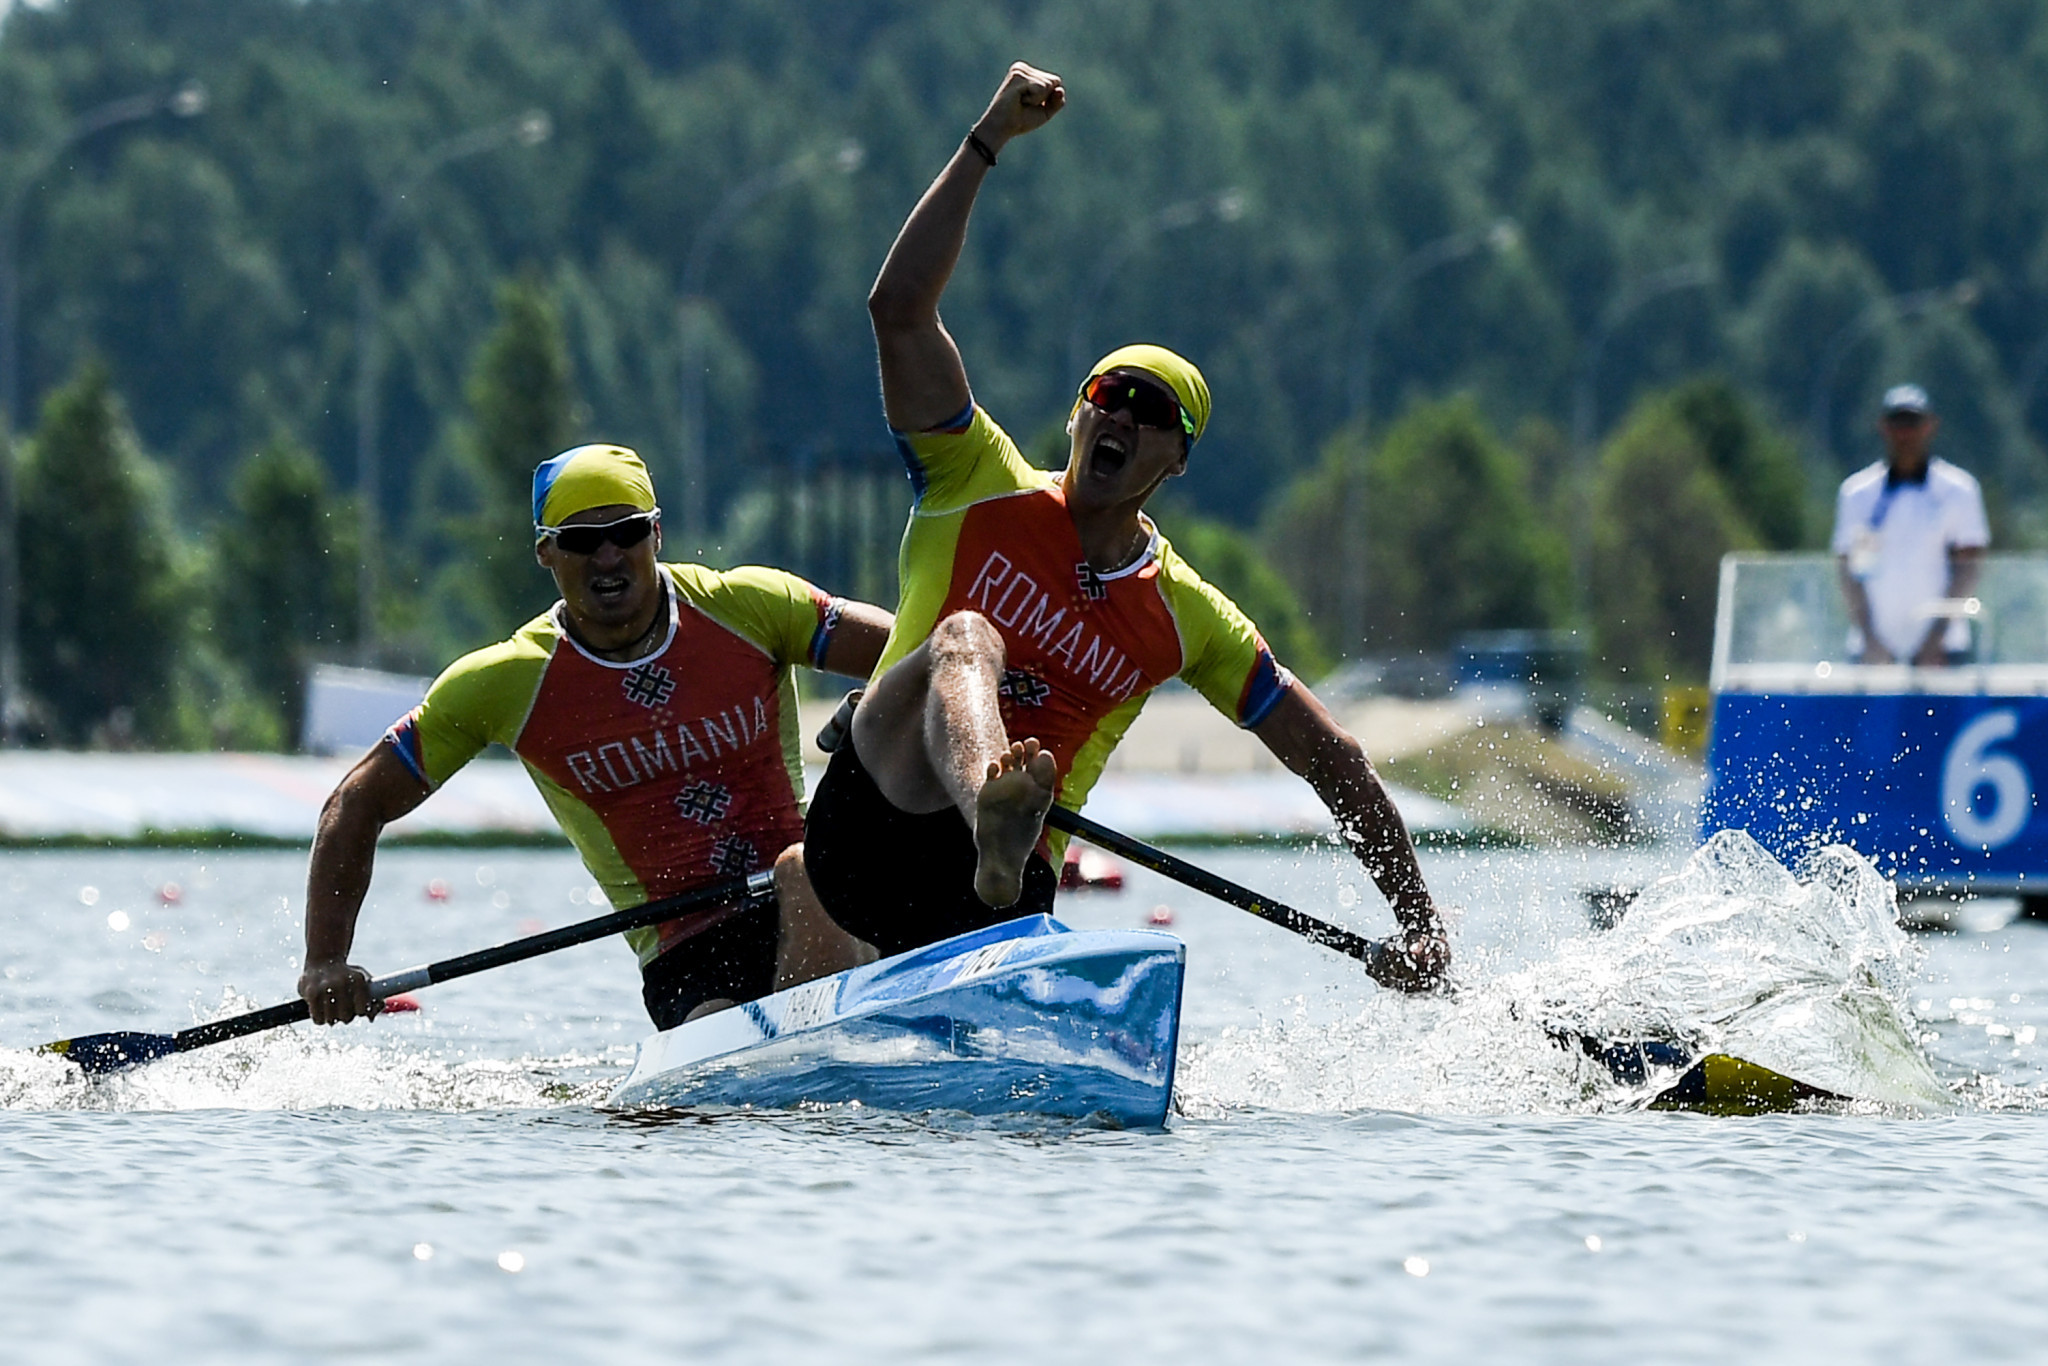 Romania's Catalin Chirila and Victor Mihalachi triumphed in the men's C2 1000m ©Getty Images